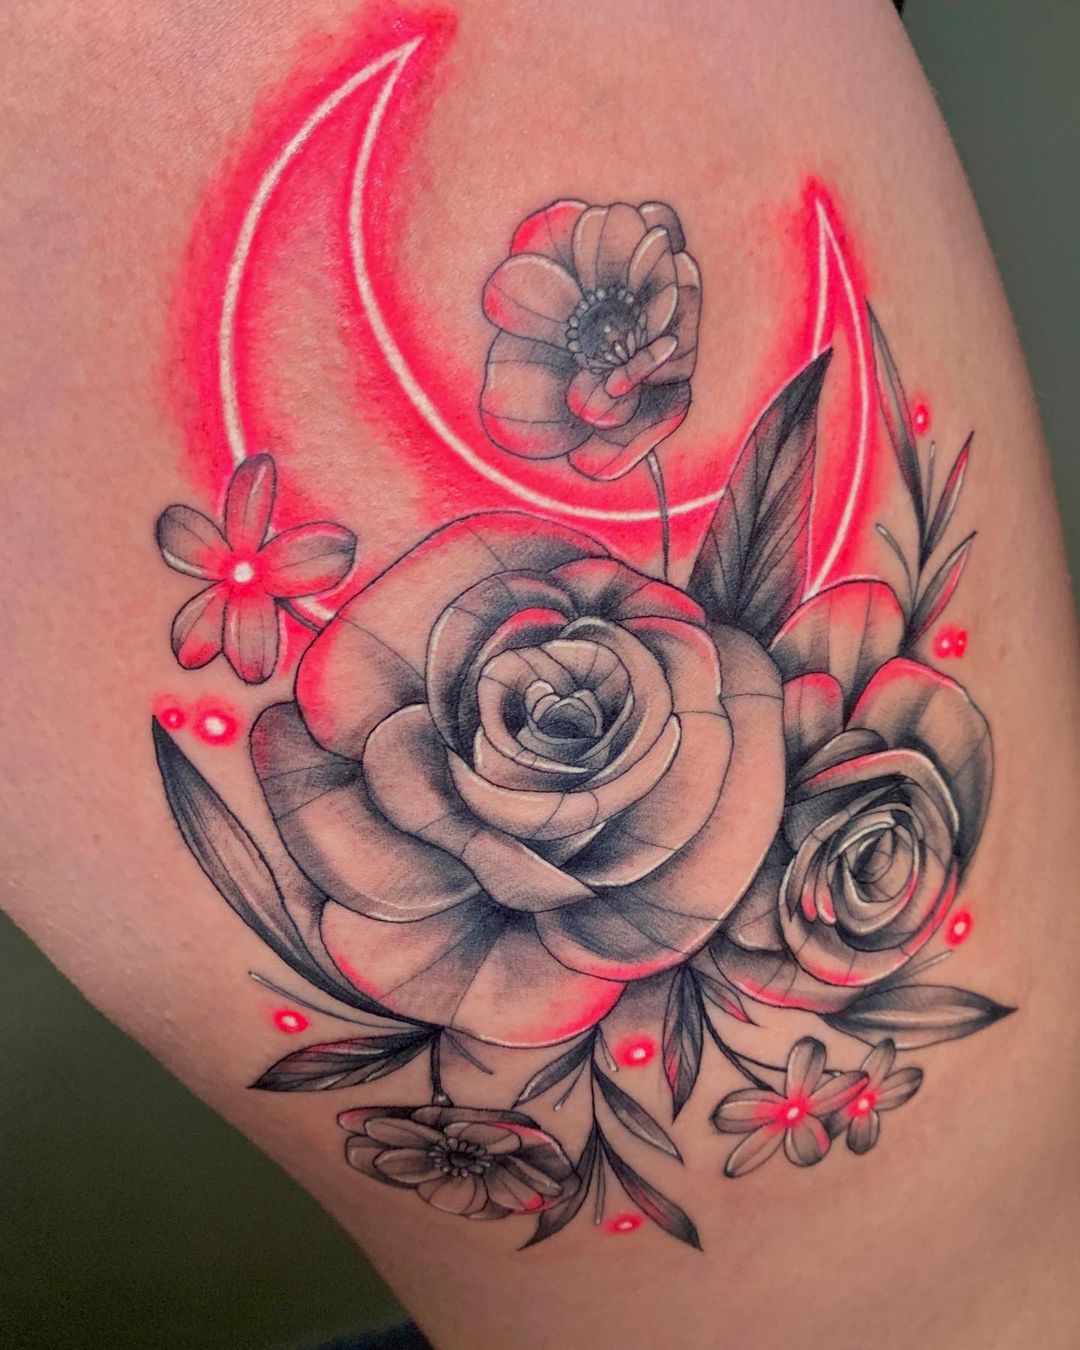 SLC Ink Tattoo  aramoonlight will be at Raventhorn Manor Now August  8th This artist from Chile creates vibrant watercolor tattoos Be sure to  reach out to her for booking details  